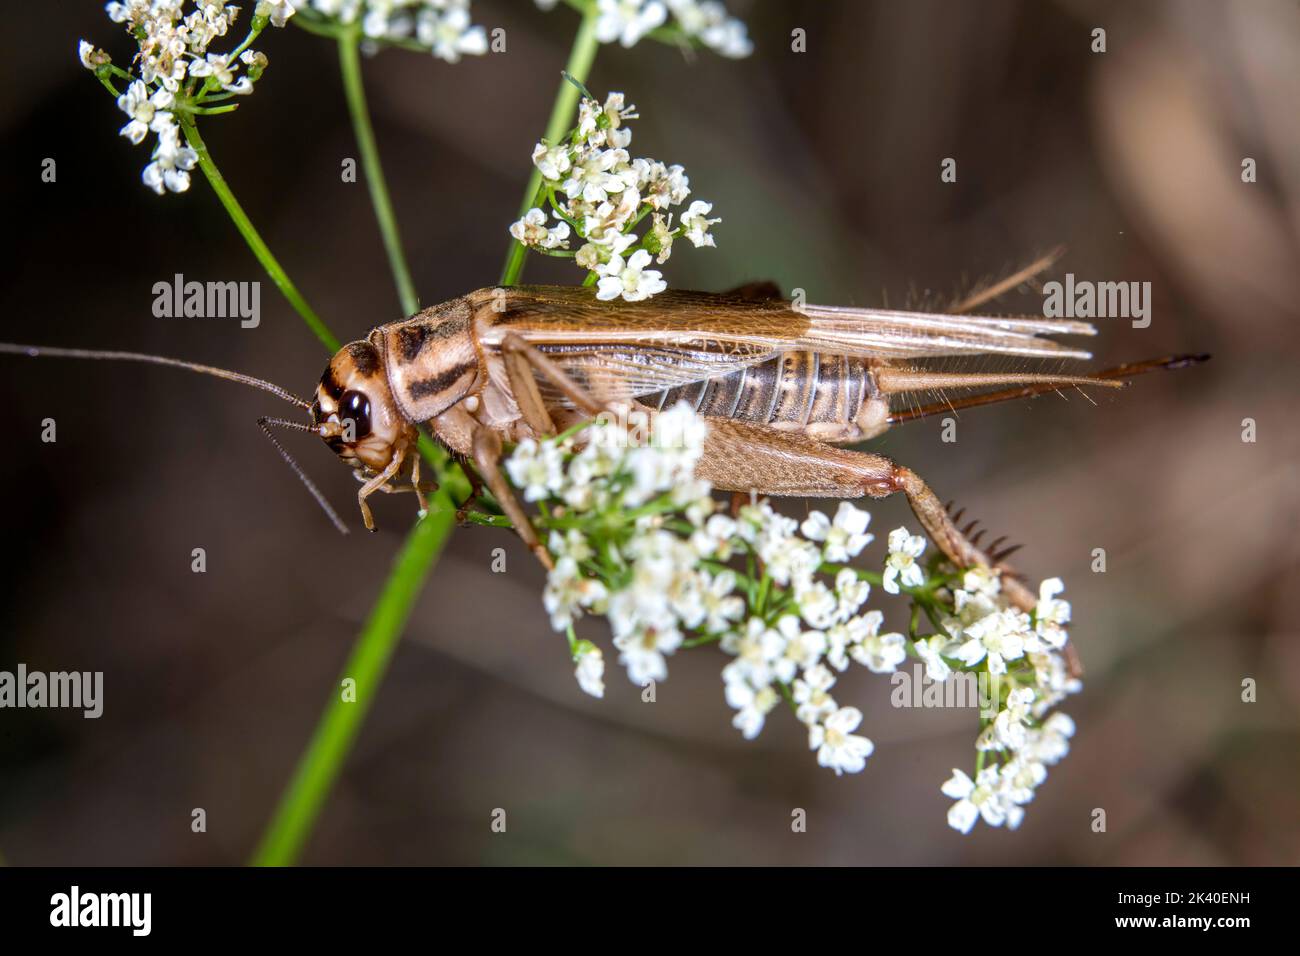 House cricket, Domestic cricket, Domestic gray cricket (Acheta domesticus, Acheta domestica, Gryllulus domesticus), female sits on an inflorescence, Stock Photo